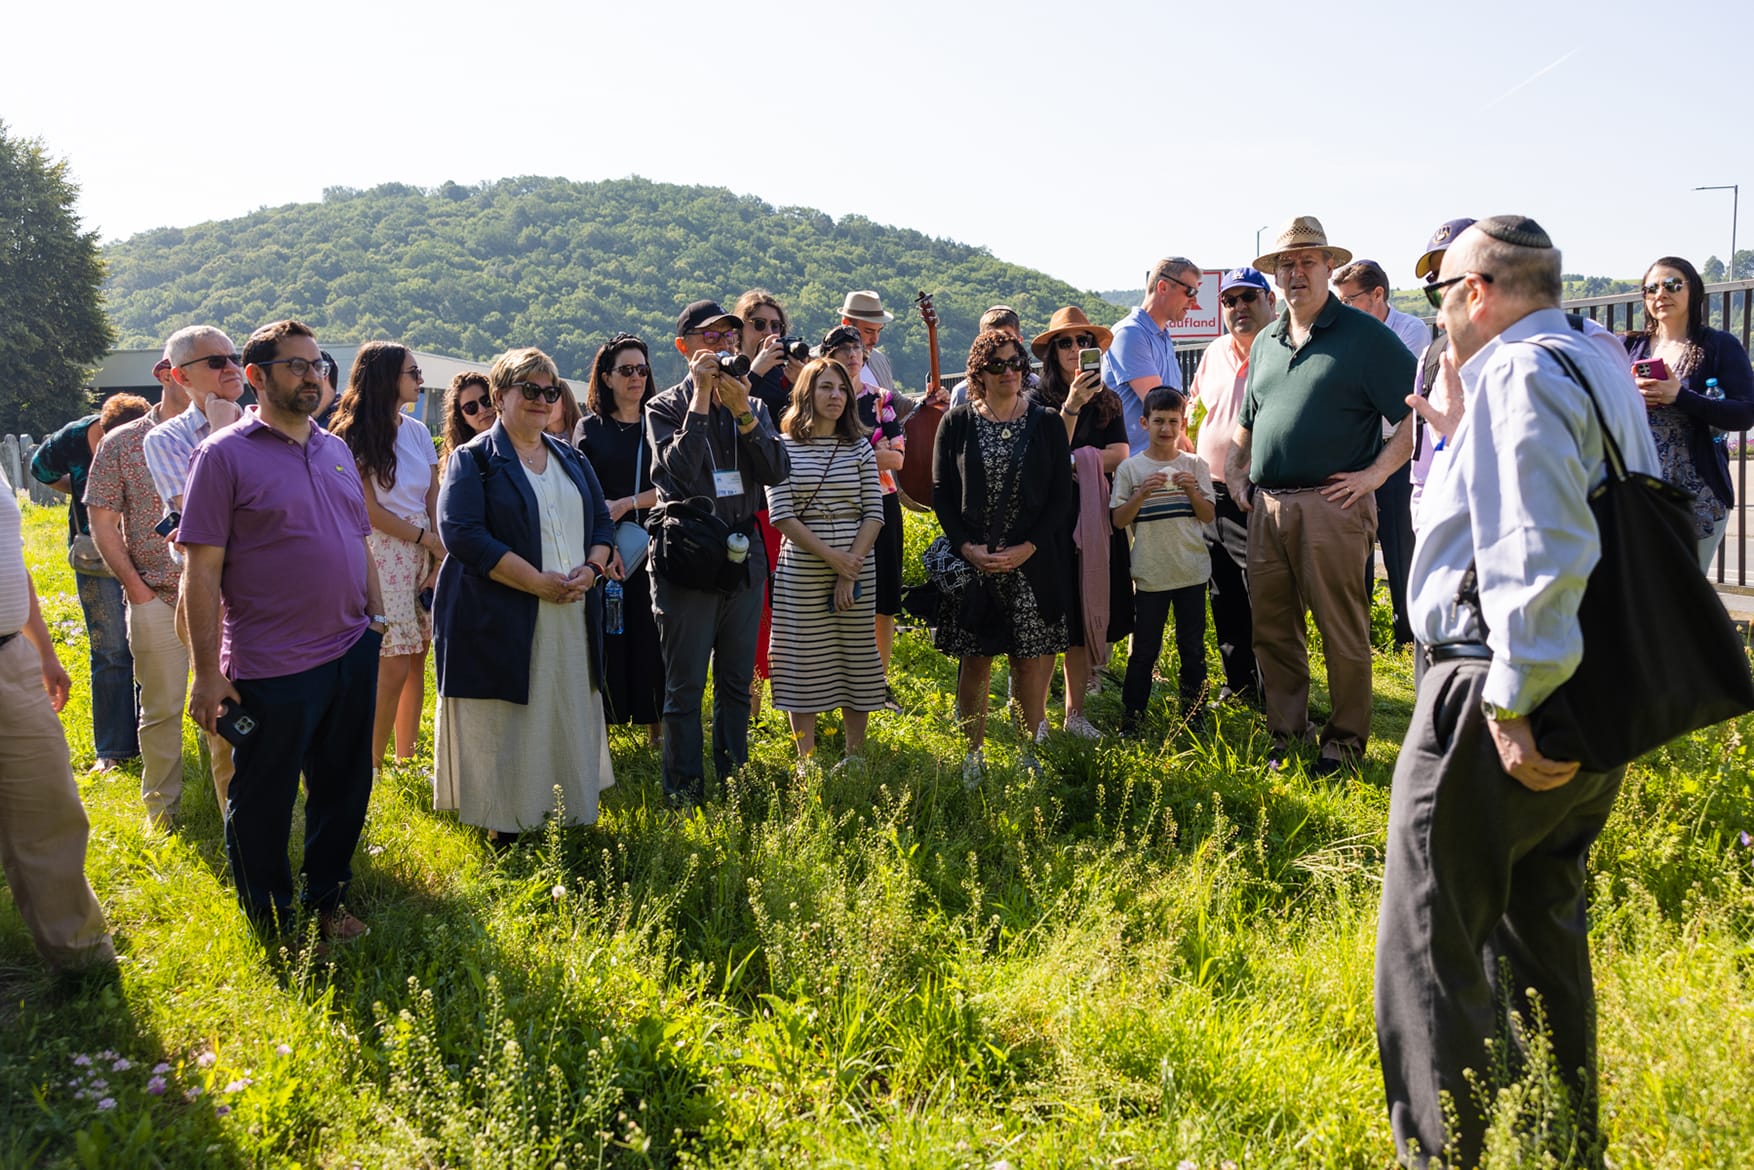 On July 5th, guests were invited to join a walking tour of Jewish Bardejov led by Pavol Hudak.